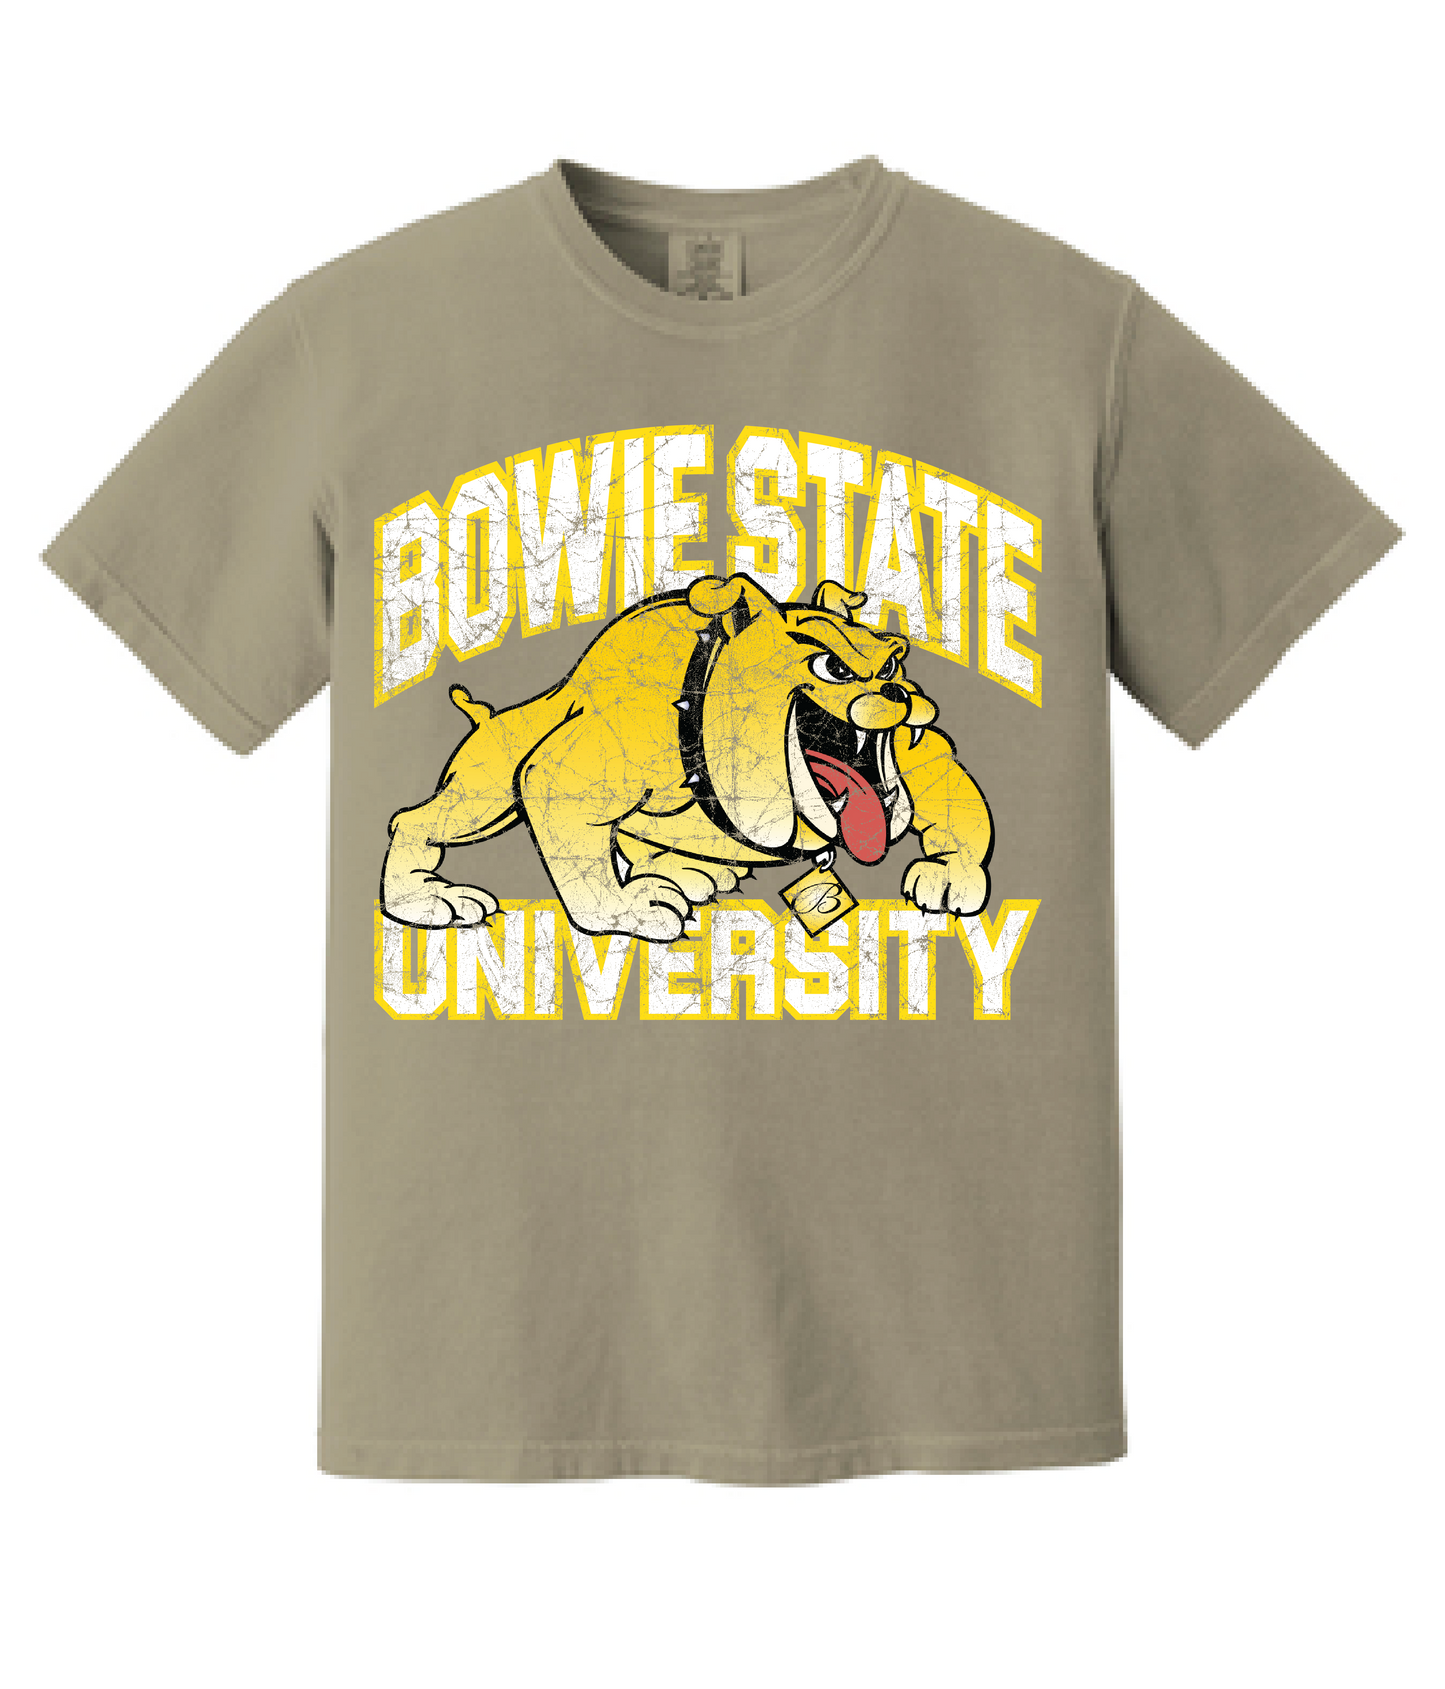 Bowie State University Vintage Style Bulldogs T-shirt